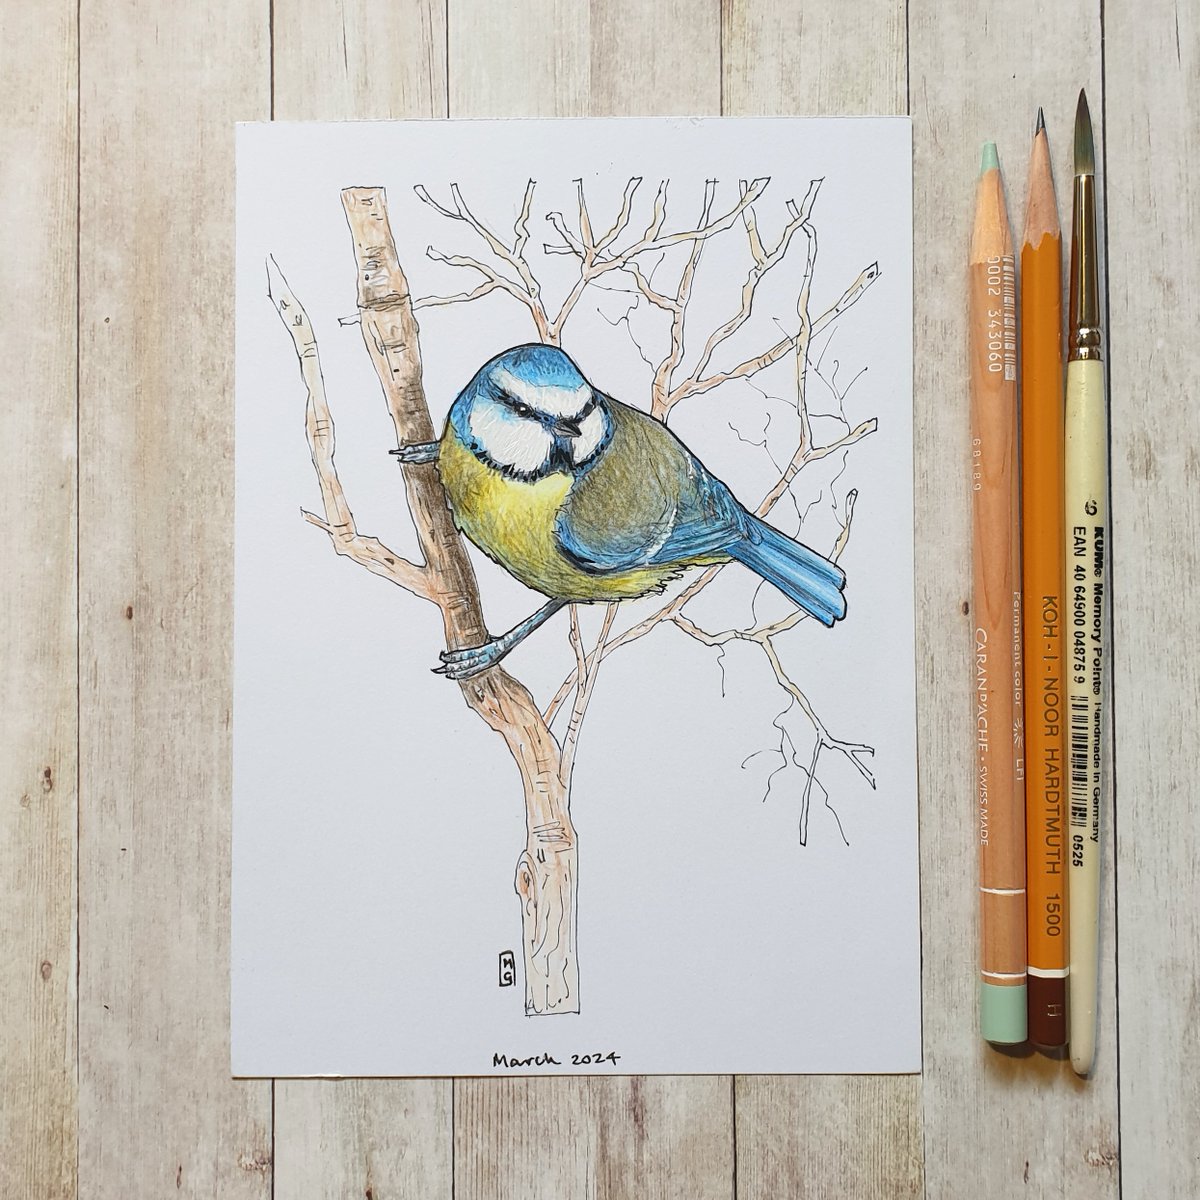 A colourful mix of blue, yellow, white and green makes the Blue Tit one of our most attractive and most recognisable garden visitors...
theweeowlart.etsy.com/listing/168141…
#BlueTit #bird #BirdDrawing #OriginalArt #drawing #PenAndInk #ColourPencil #artwork #art #TraditionalArt